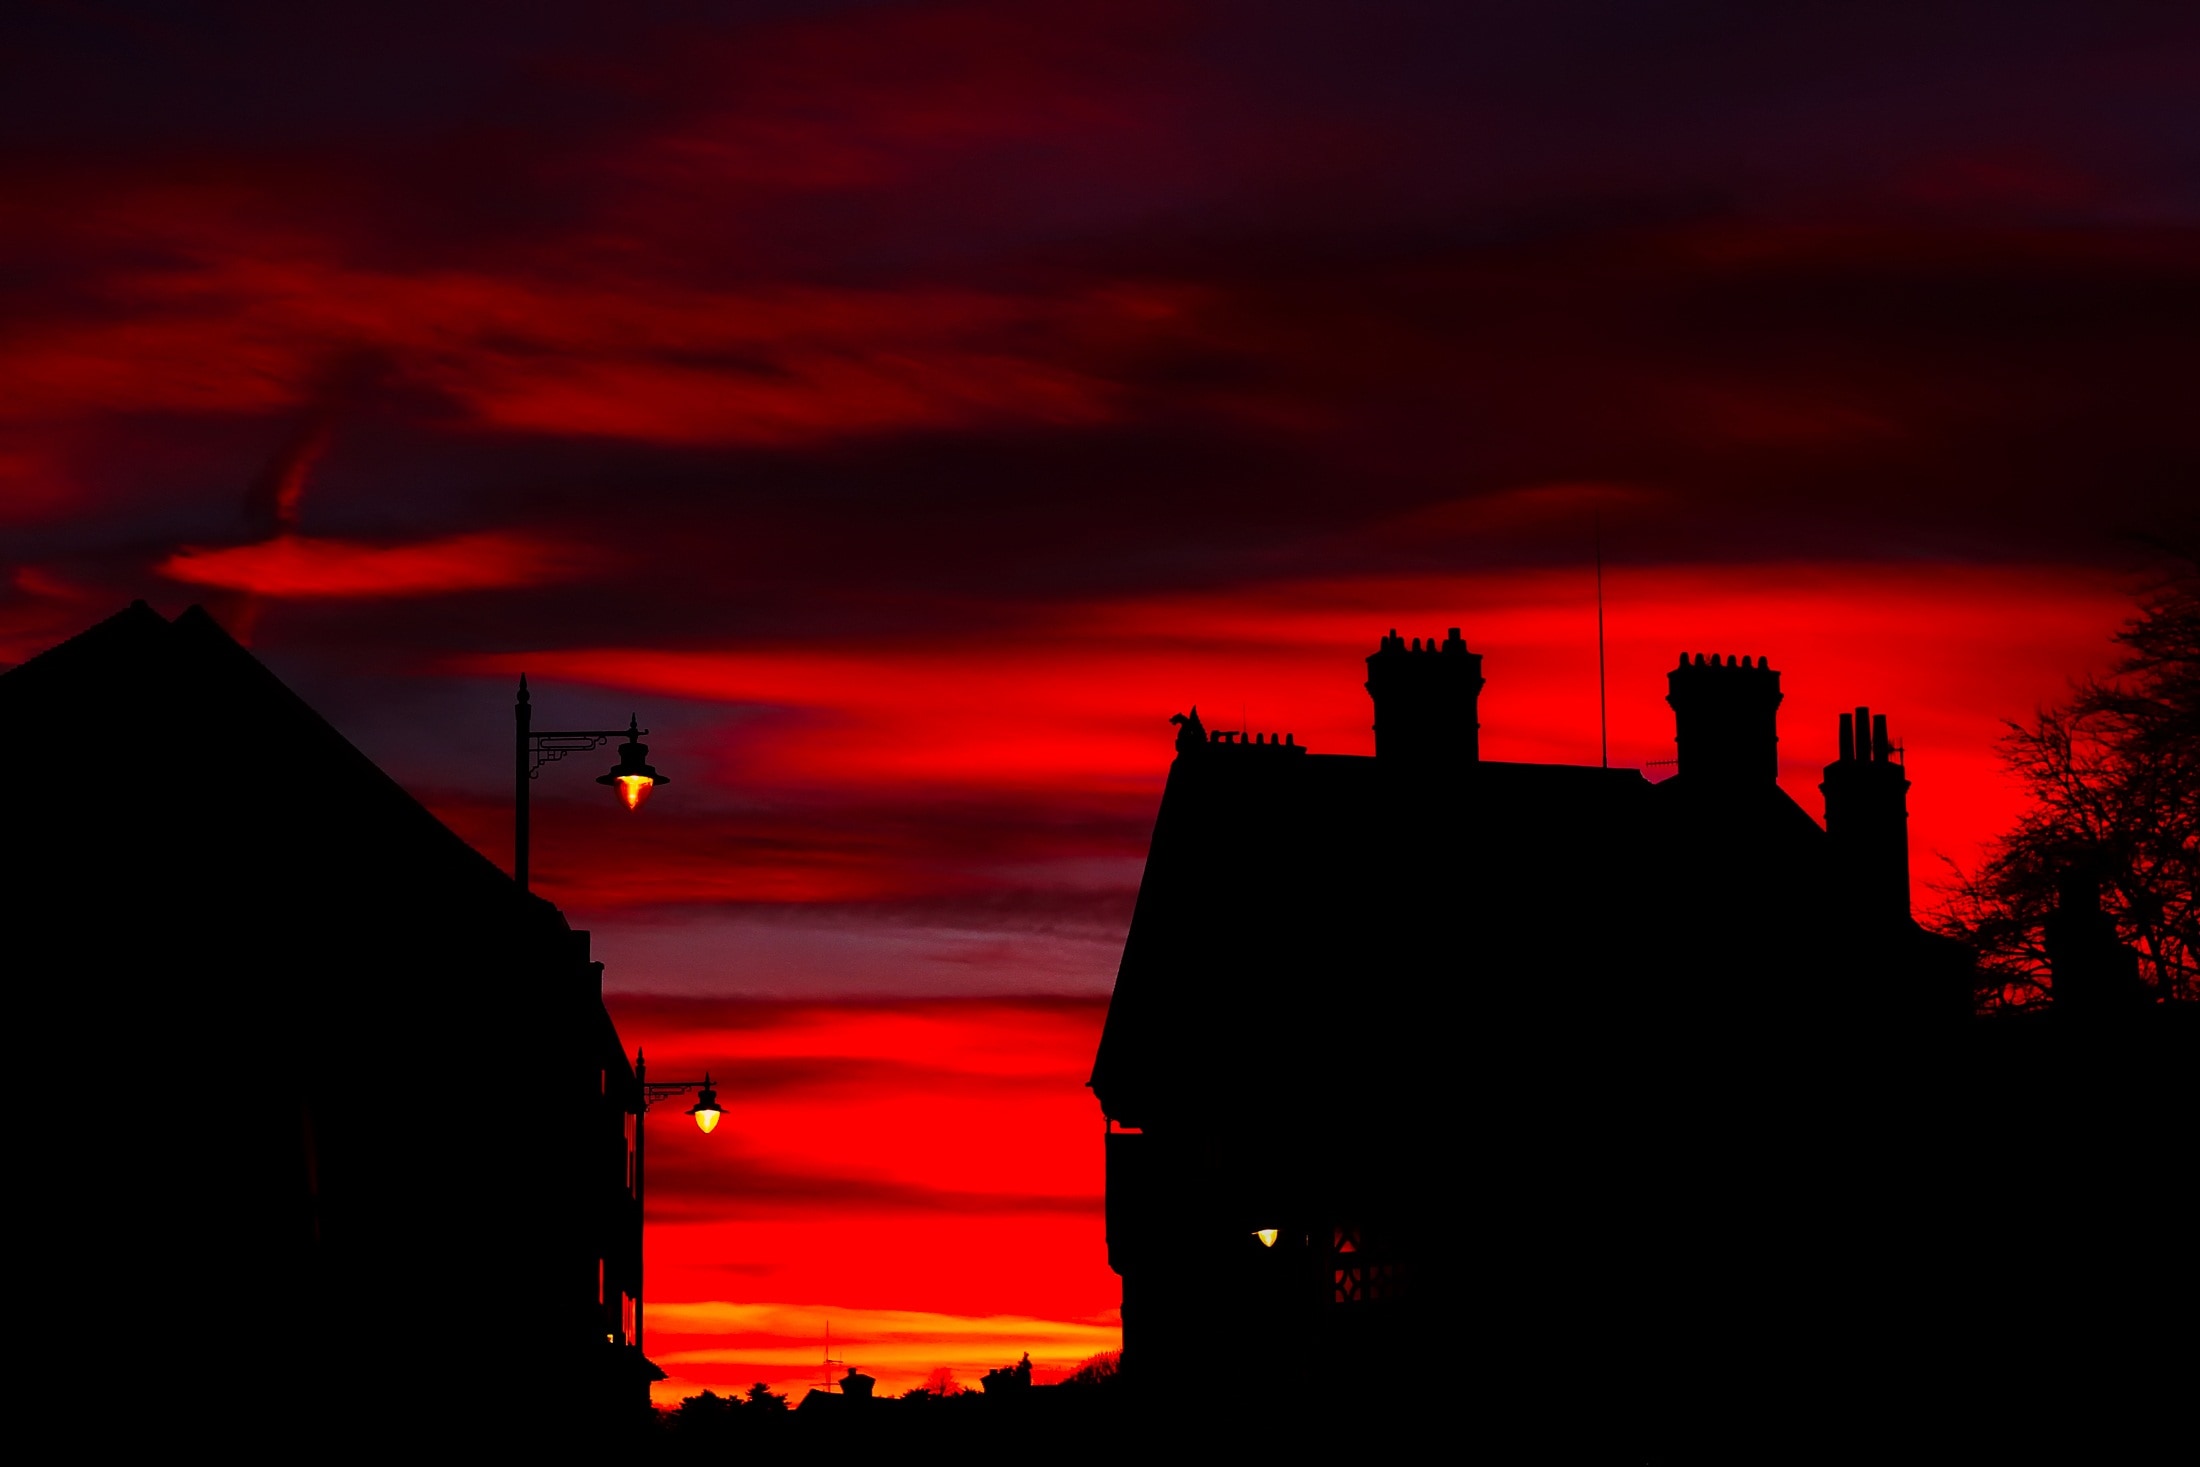 Sunset, England, Silhouettes, Dusk, red, silhouette